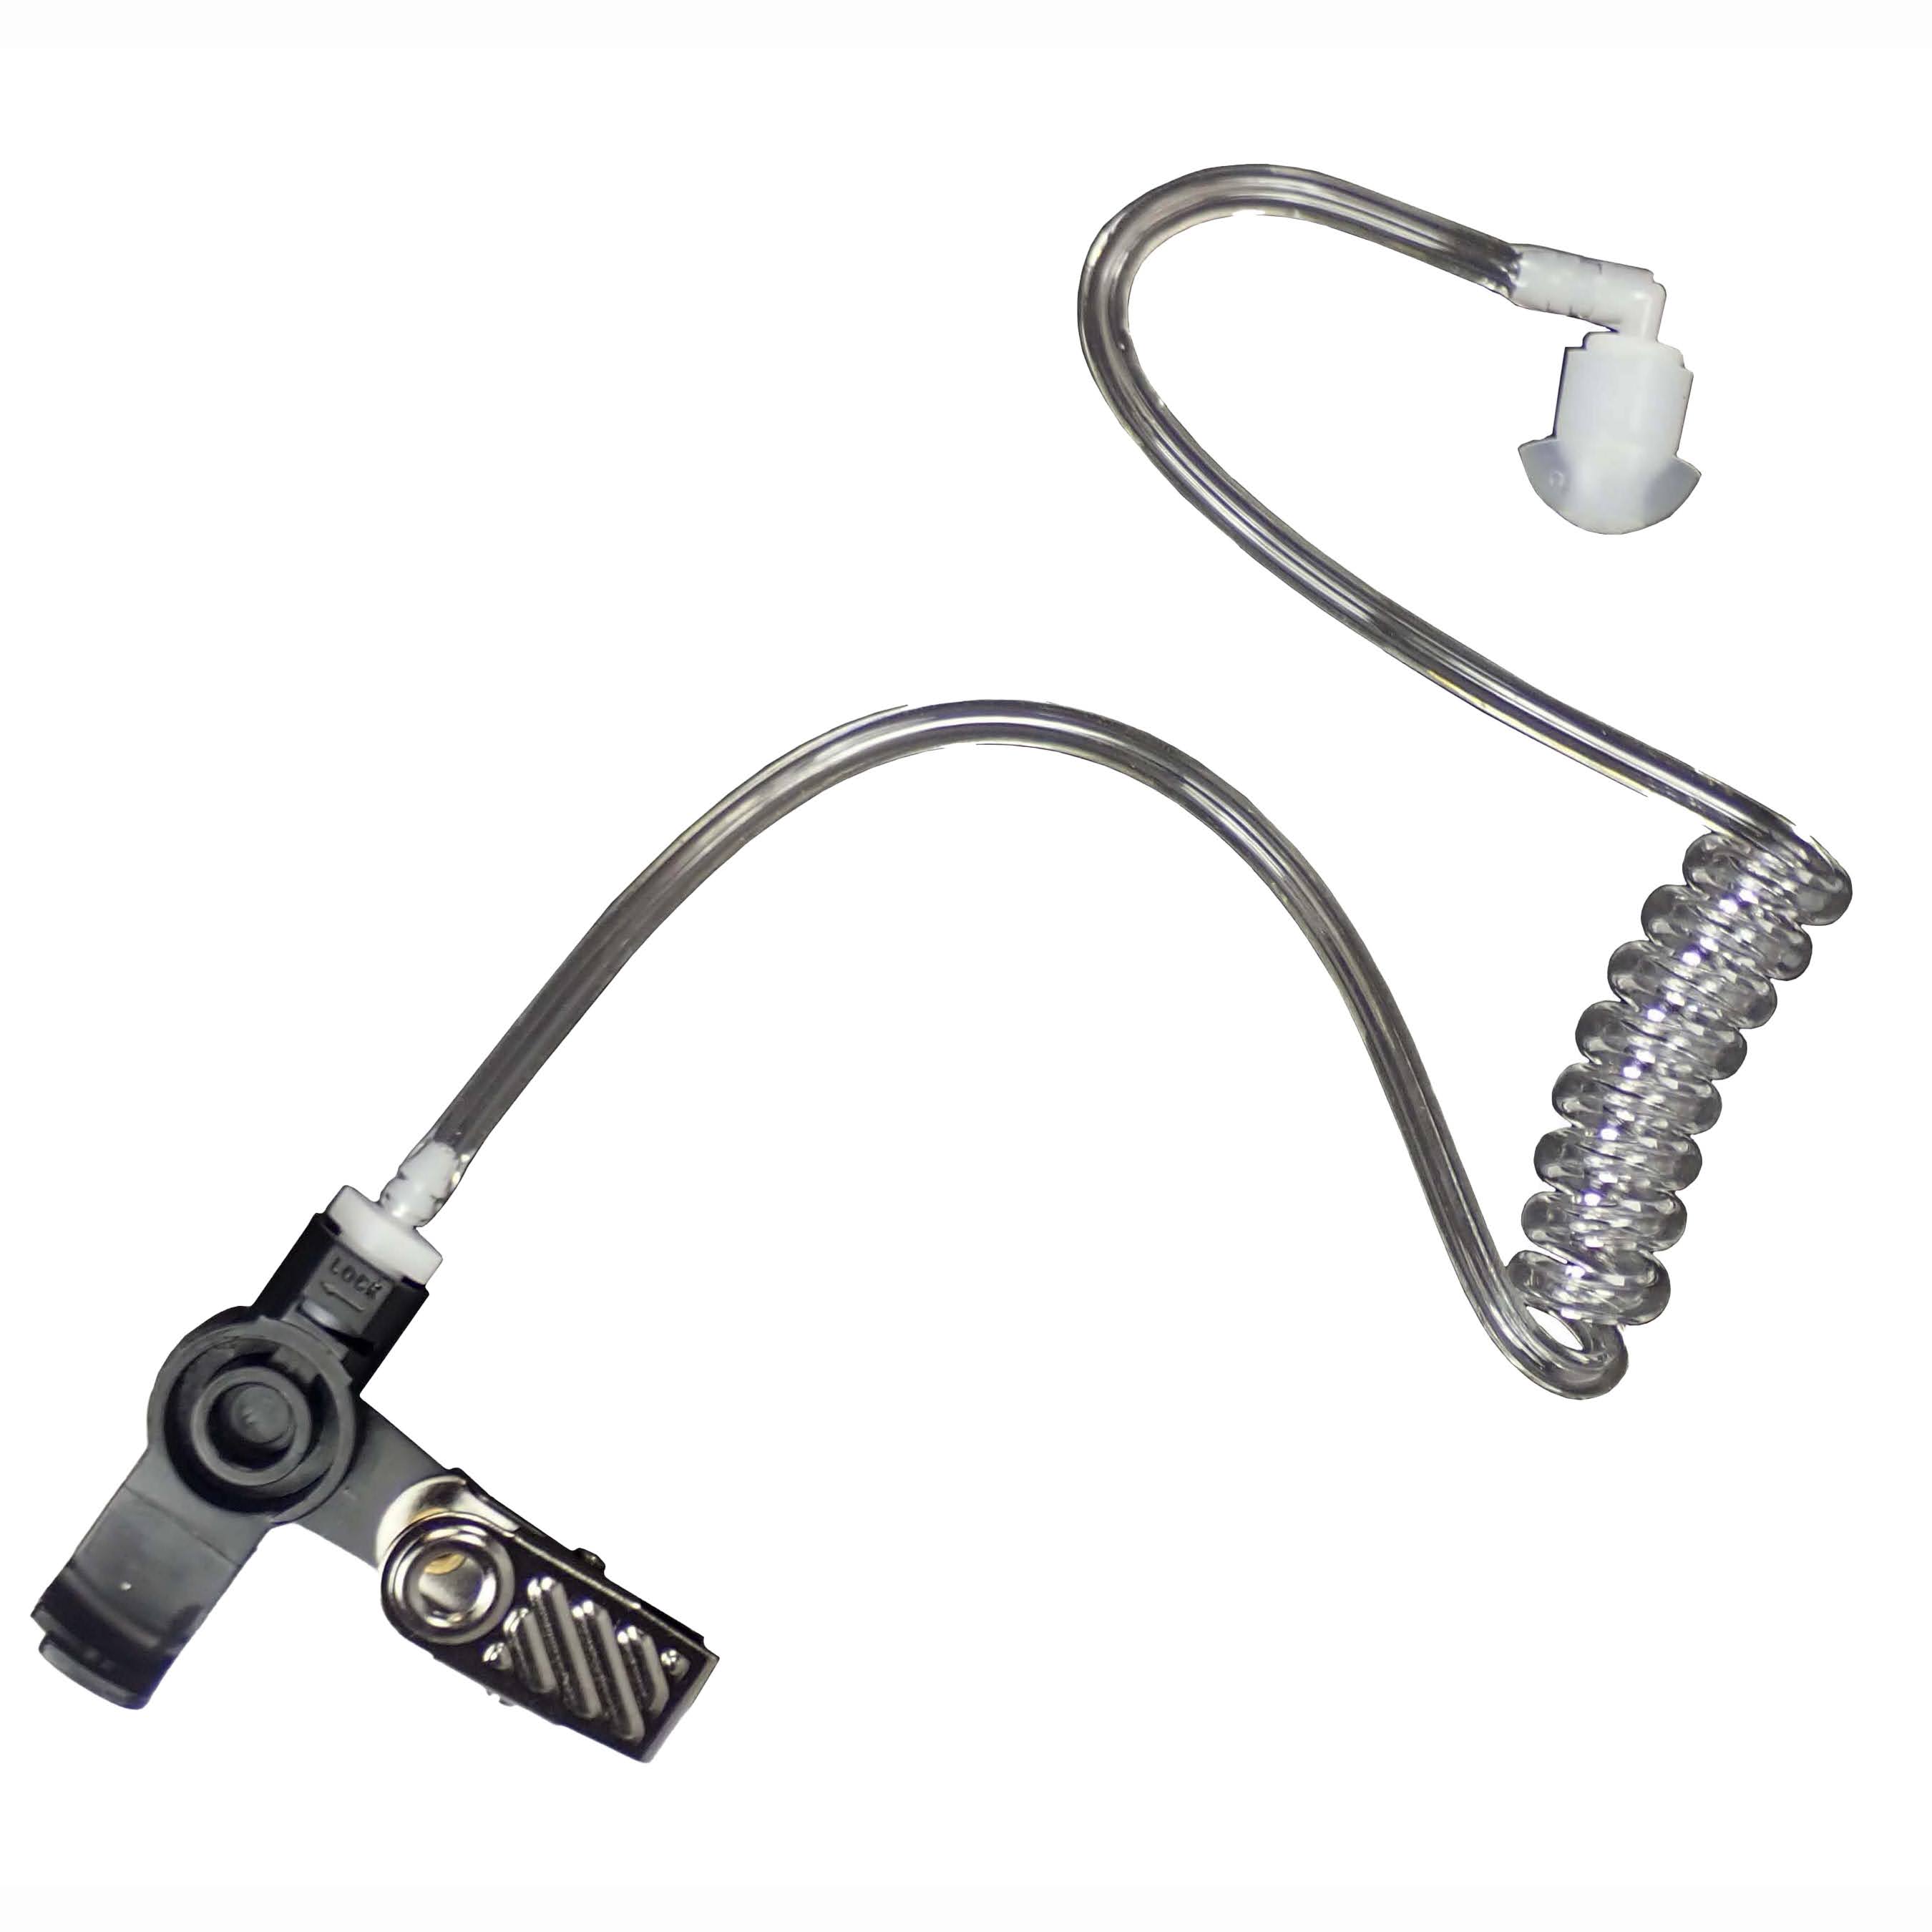 Acoustic tube replacement earpiece